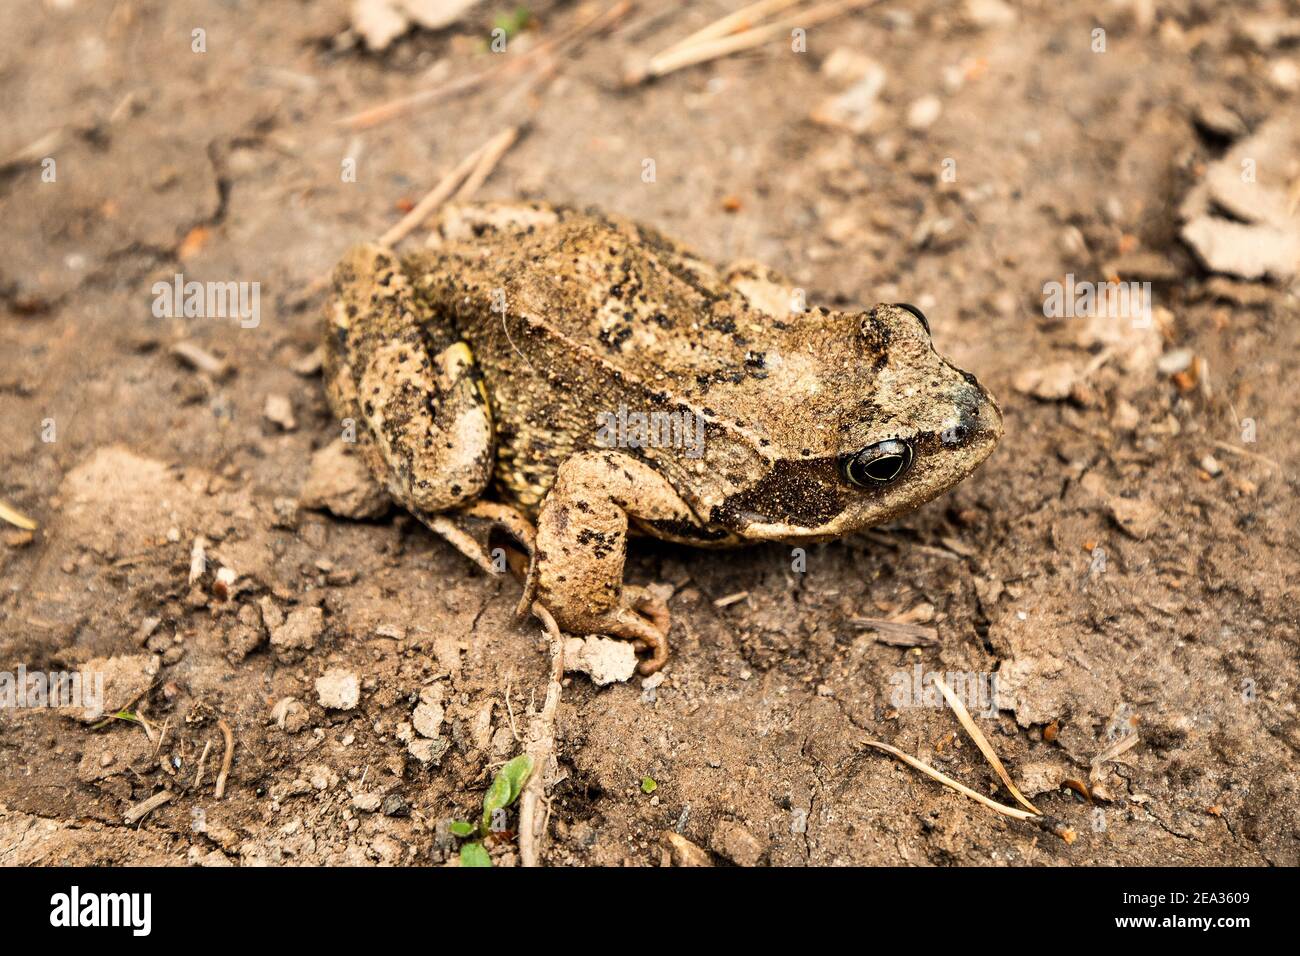 A toad with camouflage paint almost merges in color with a road in a swampy area Stock Photo